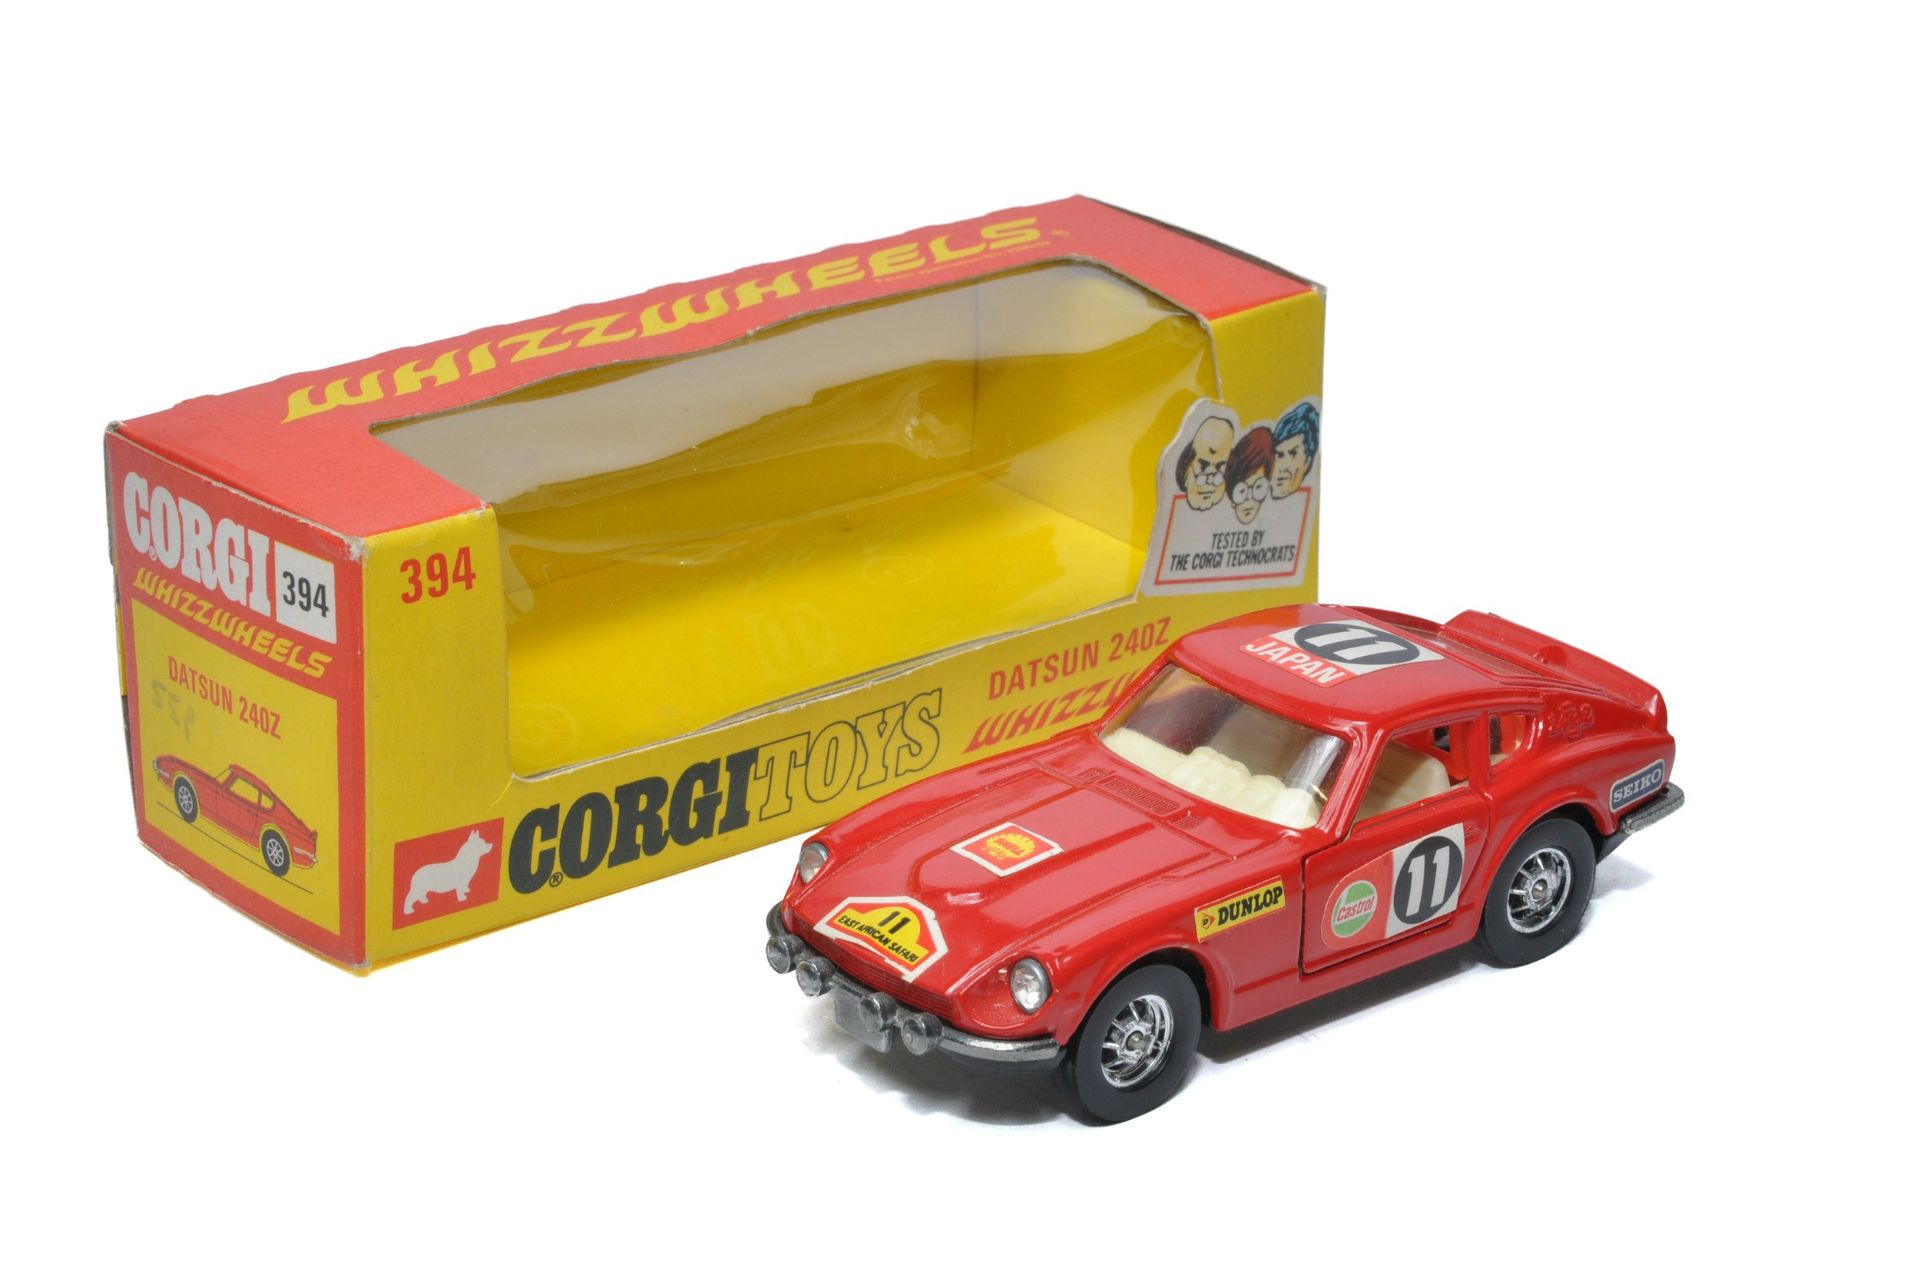 Corgi No. 394 Whizzwheels Datsun 240Z. Red (plus decals) with white interior. Displays excellent